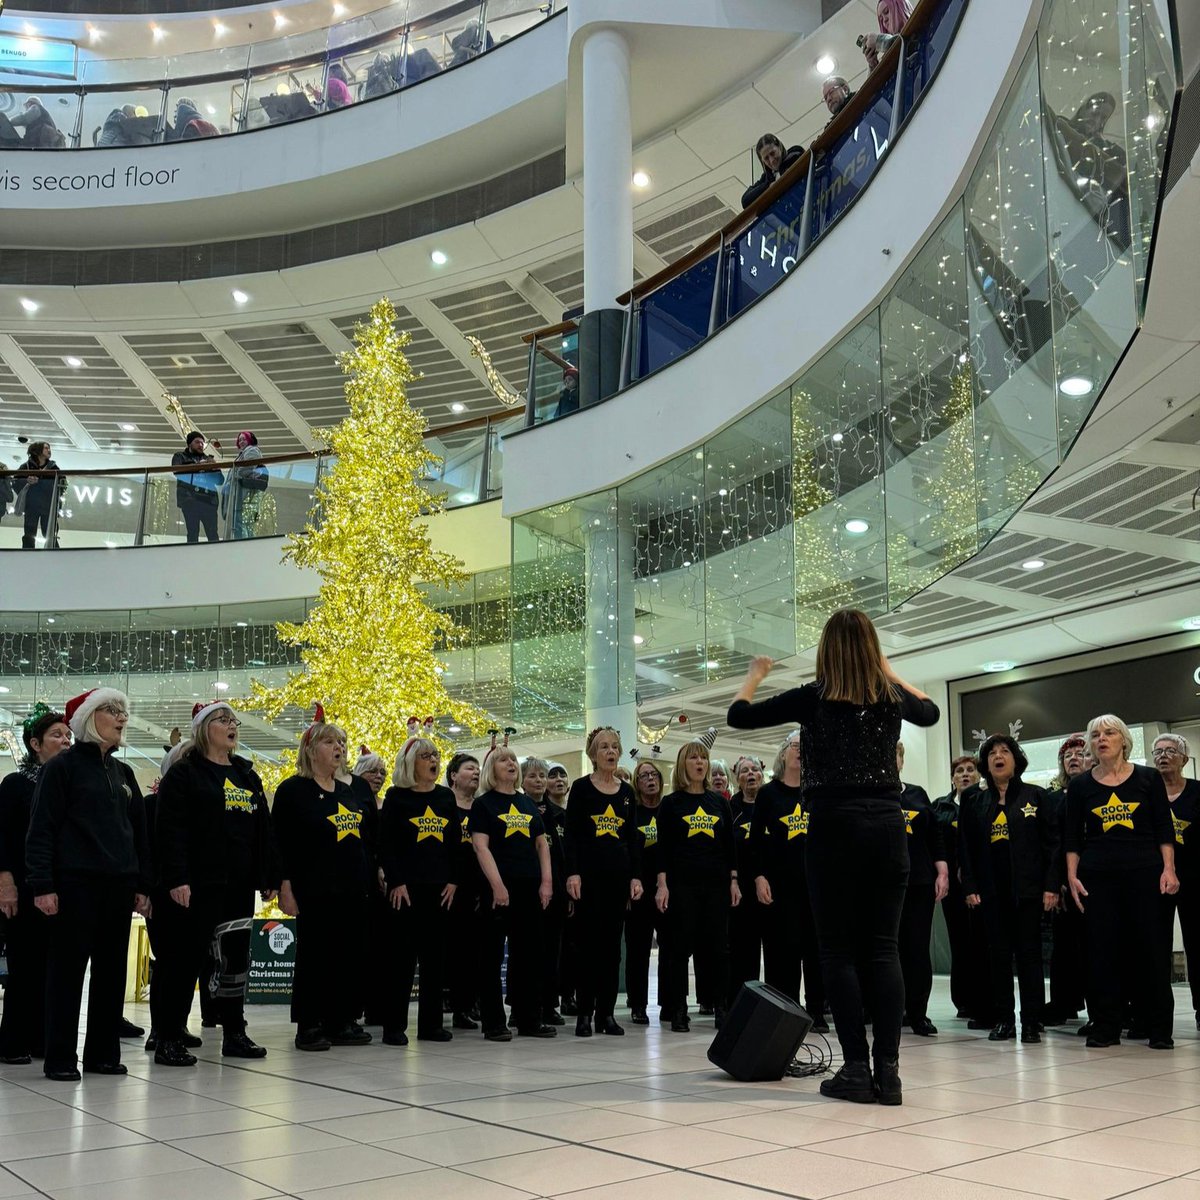 We had so much fun watching the Rock Choir perform last week! 😍 🎄 Come and pay us a visit and you may be lucky enough to catch a fantastically festive performance, as we have many choirs performing in the lead up to Christmas, with all donations going to @GCH_Charity! 🌟